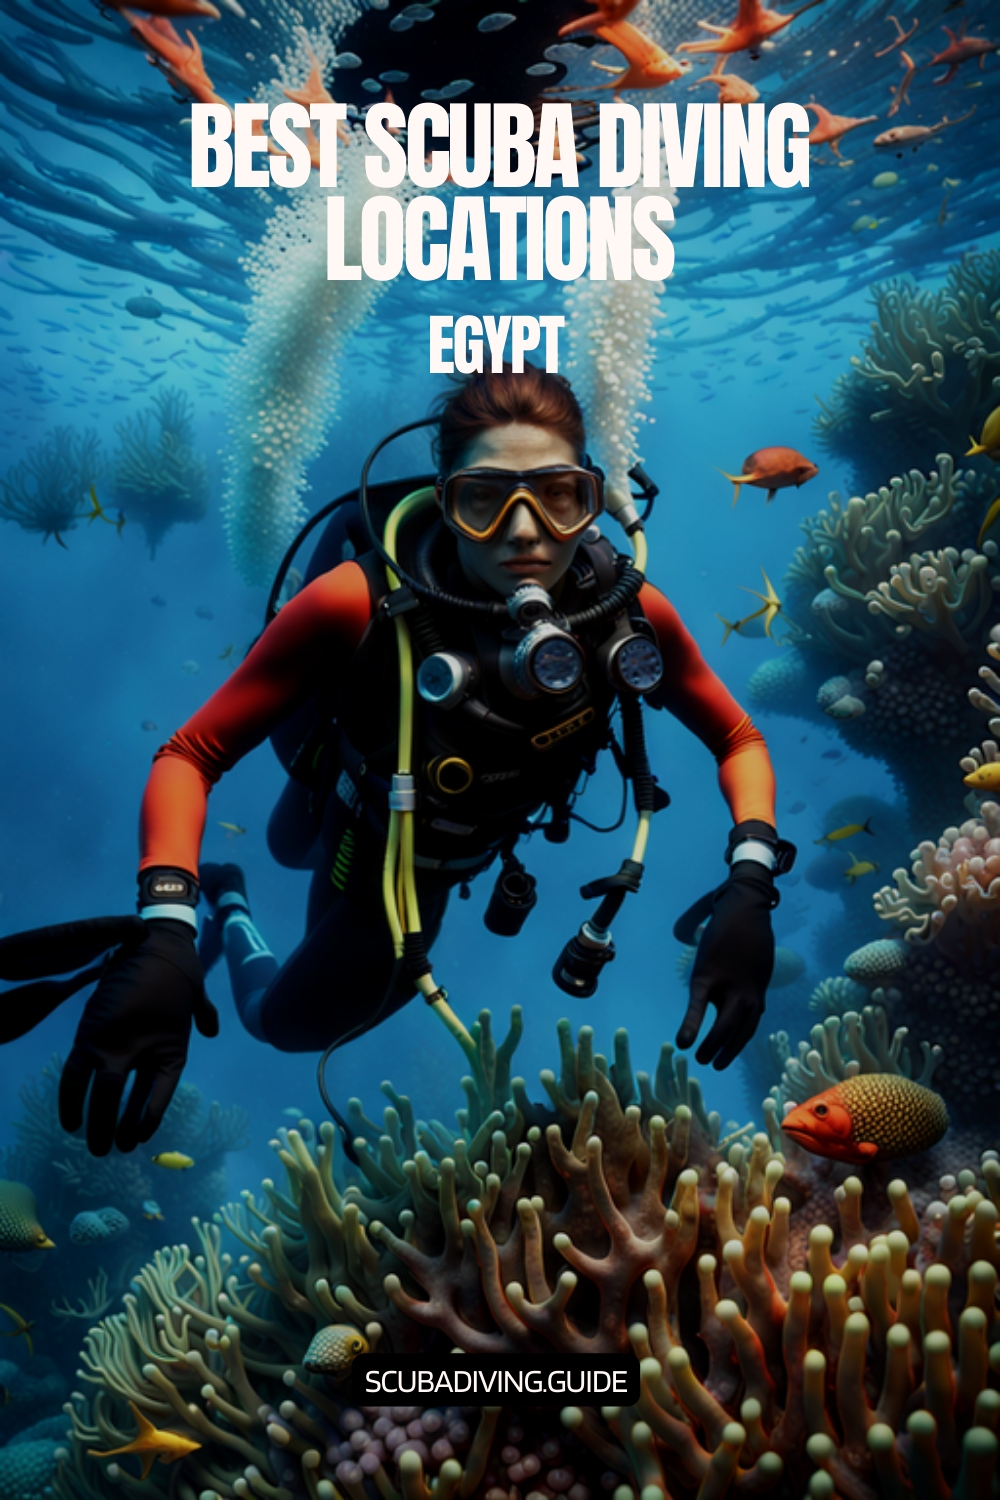 Scuba Diving Locations in Egypt